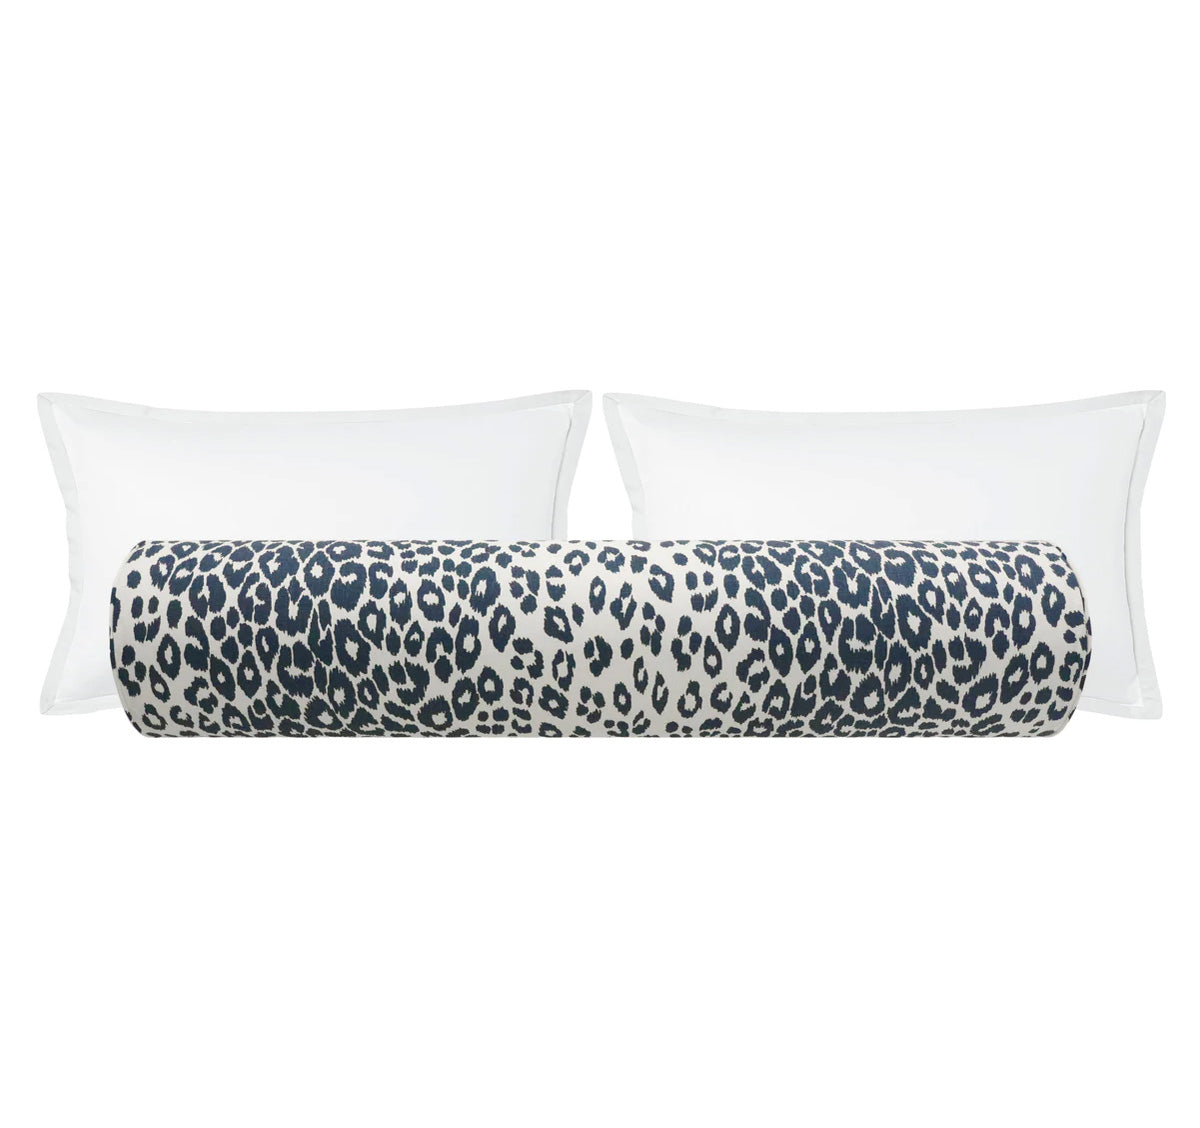 THE BOLSTER :: ICONIC LEOPARD // INK | SCHUMACHER